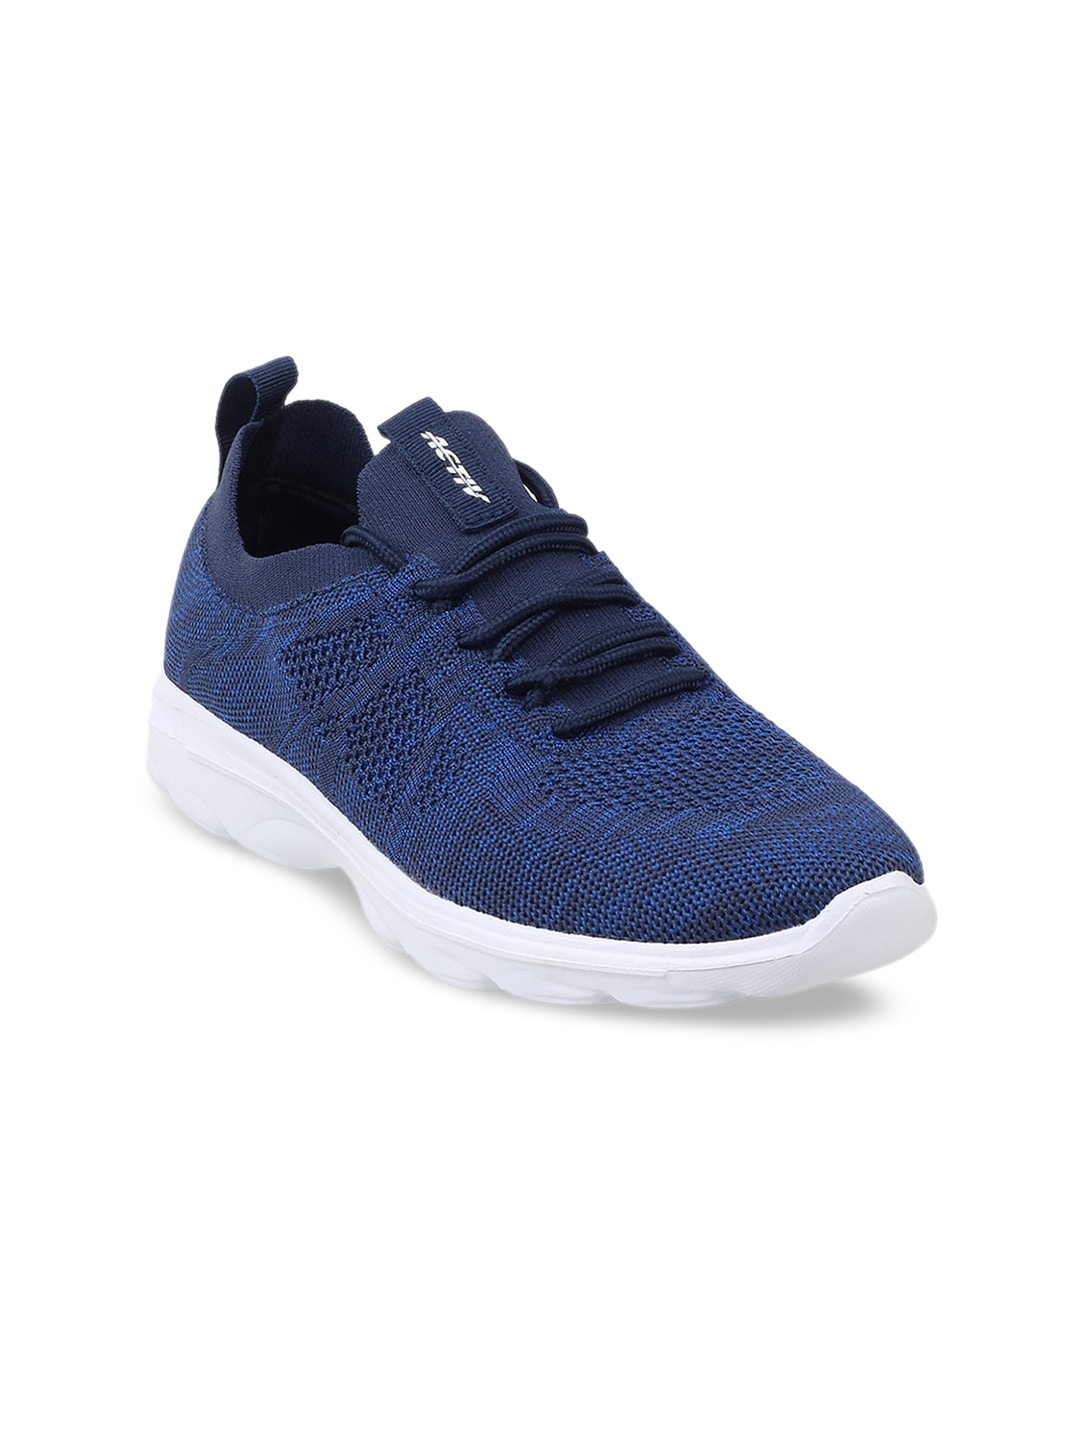 ACTIV Women Blue Woven Design Sneakers Price in India